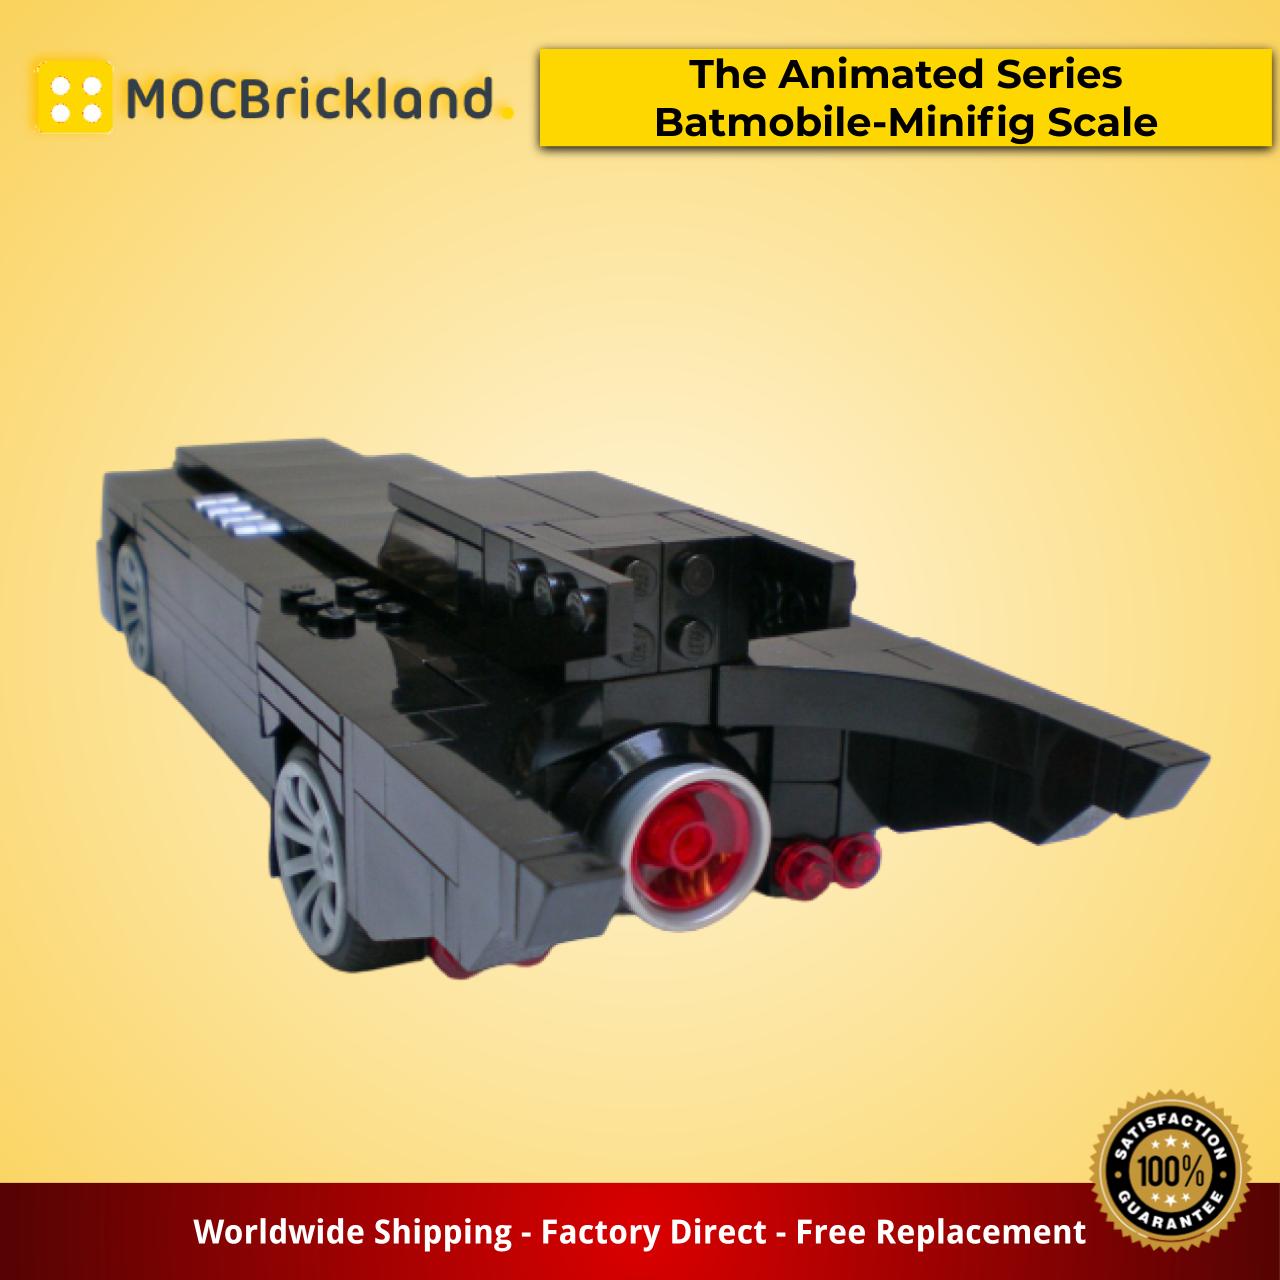 MOCBRICKLAND MOC-15632 The Animated Series Batmobile-Minifig Scale (1992-1995)